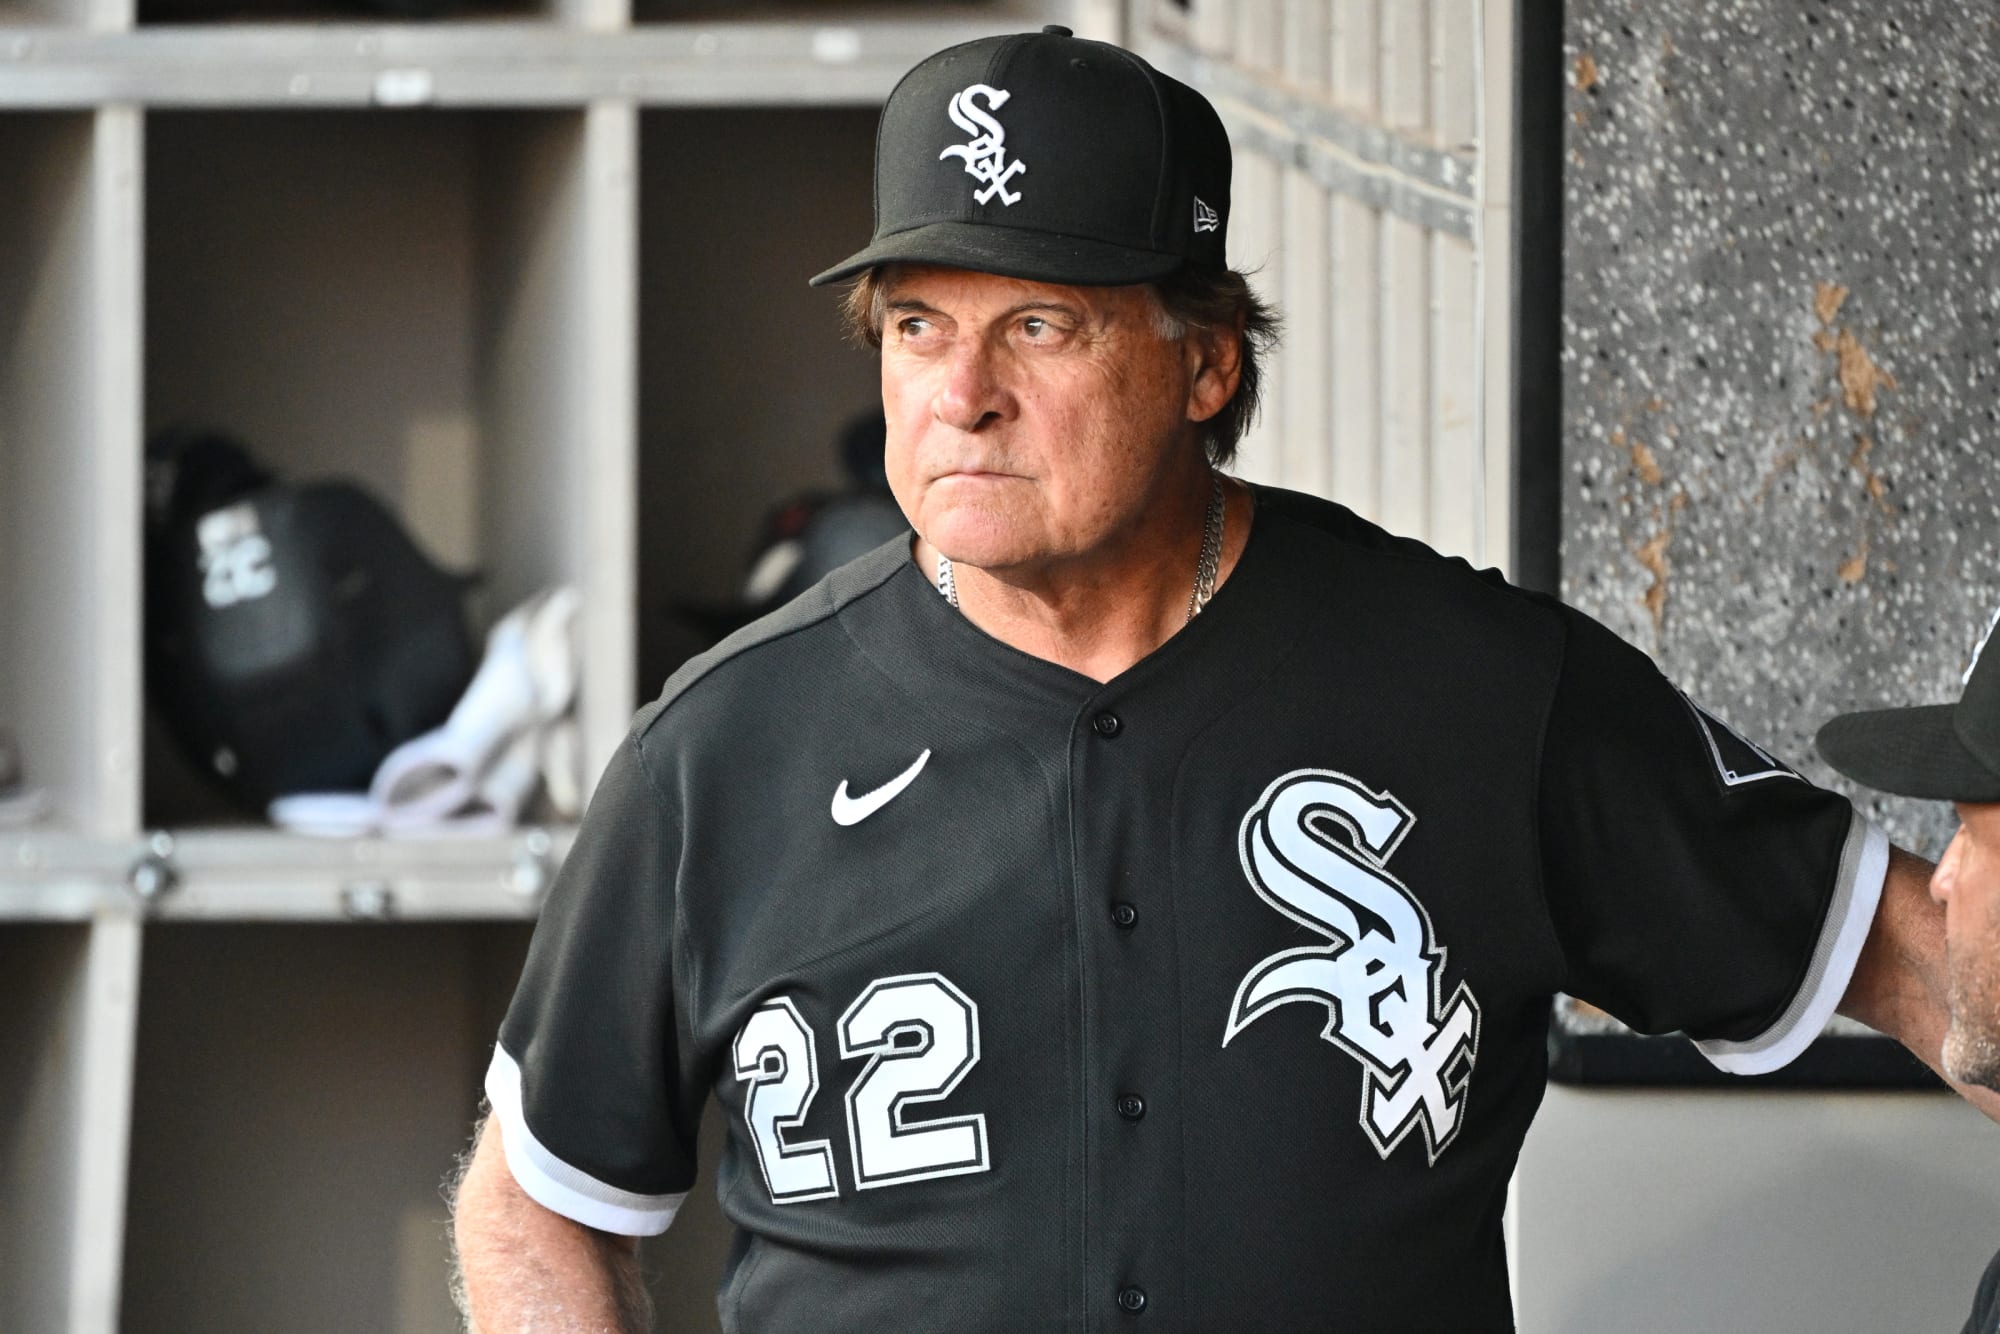 Cueto helps White Sox beat Twins after La Russa steps down